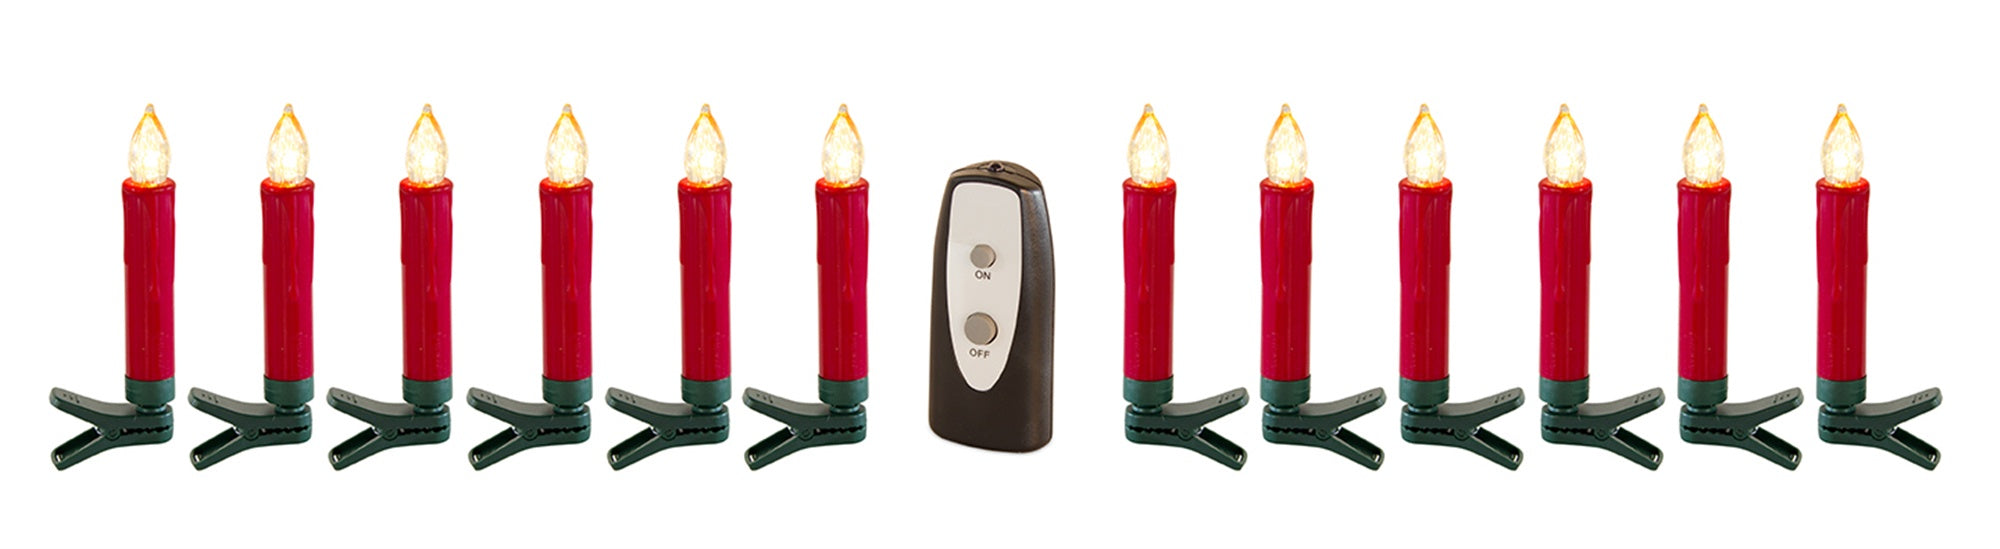 Red LED Clip-On Candles